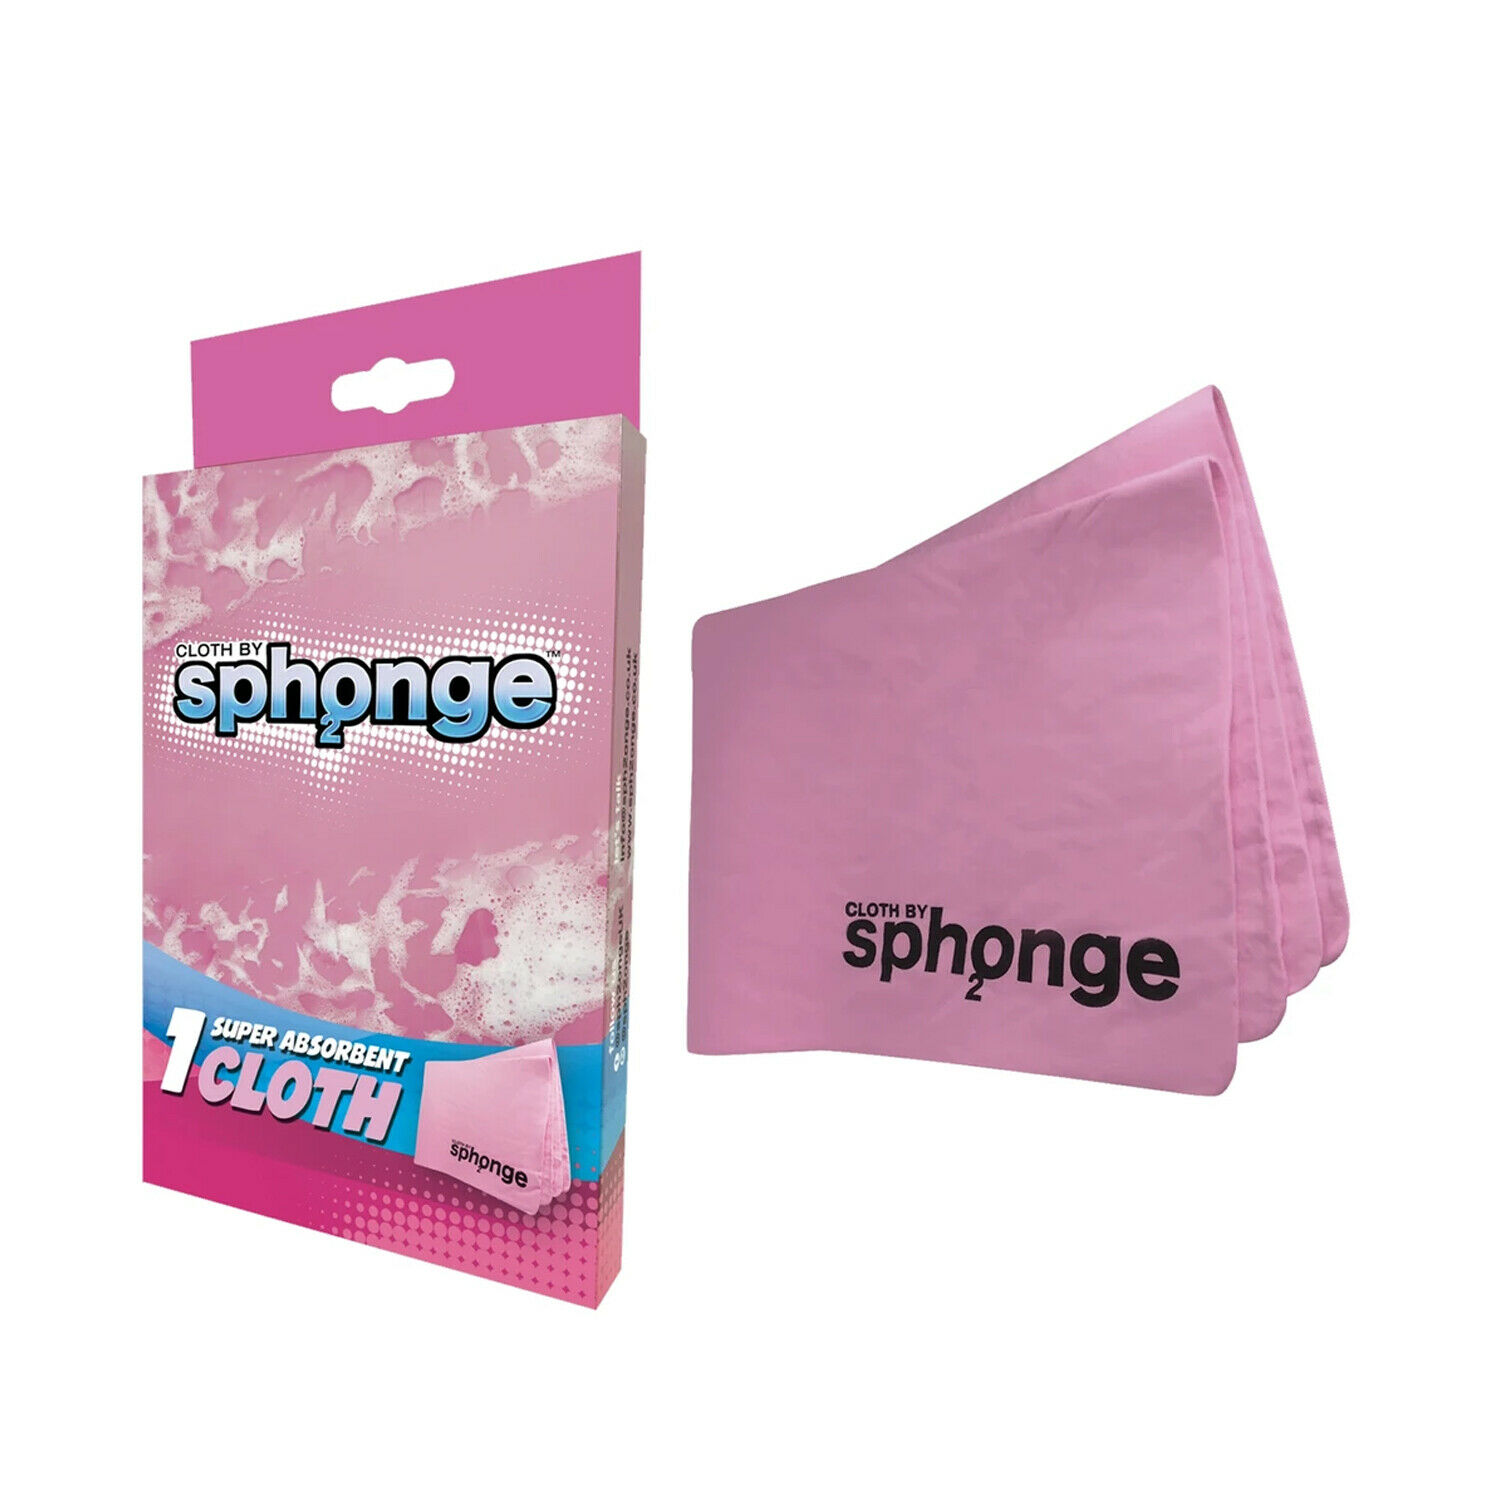 https://www.mrprice.ie/wp-content/uploads/2021/08/SUPER-ABSORBENT-CLOTH-BY-SPH2ONGE-Pink-..jpg